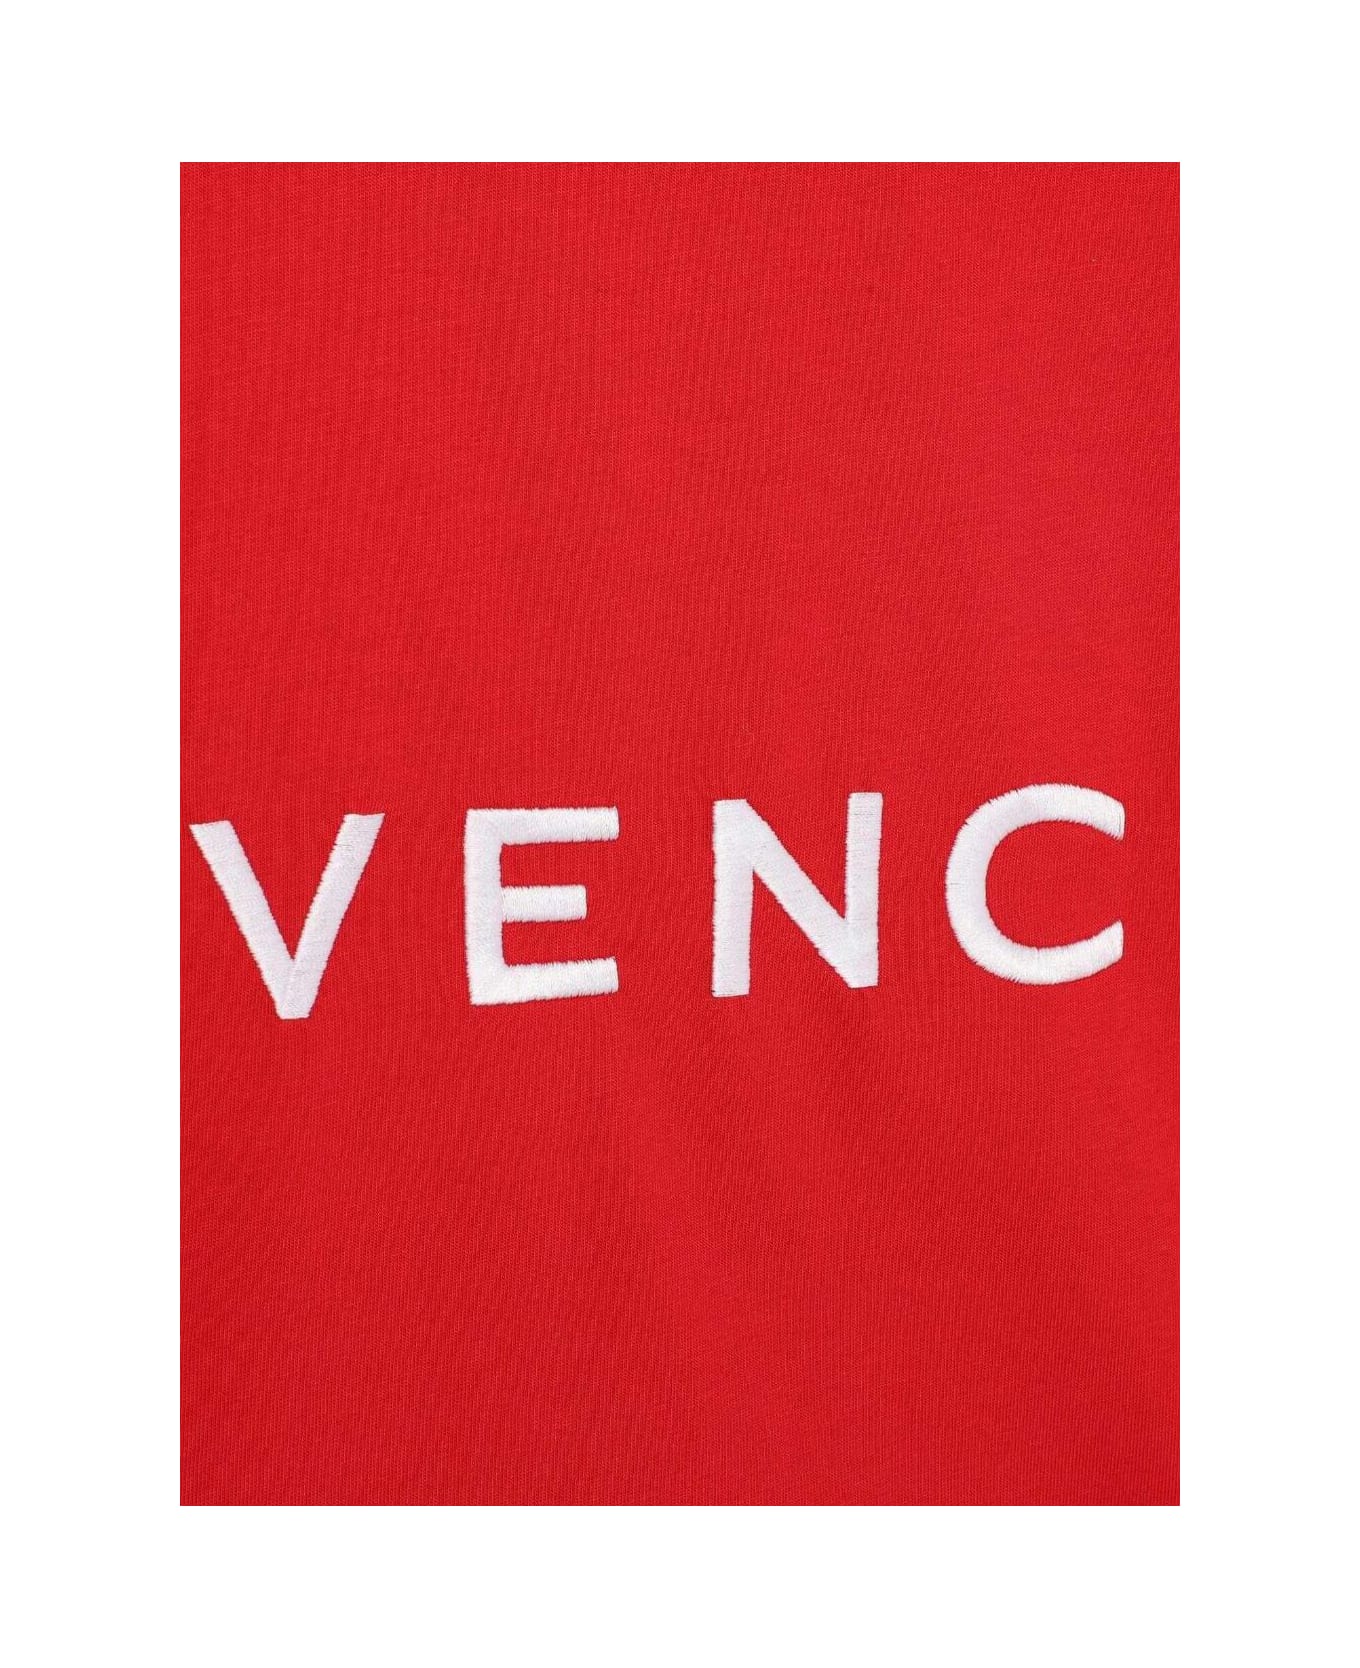 Givenchy Red T-shirt With Disney 'cartoon' Print And Logo In Cotton Boy - Red